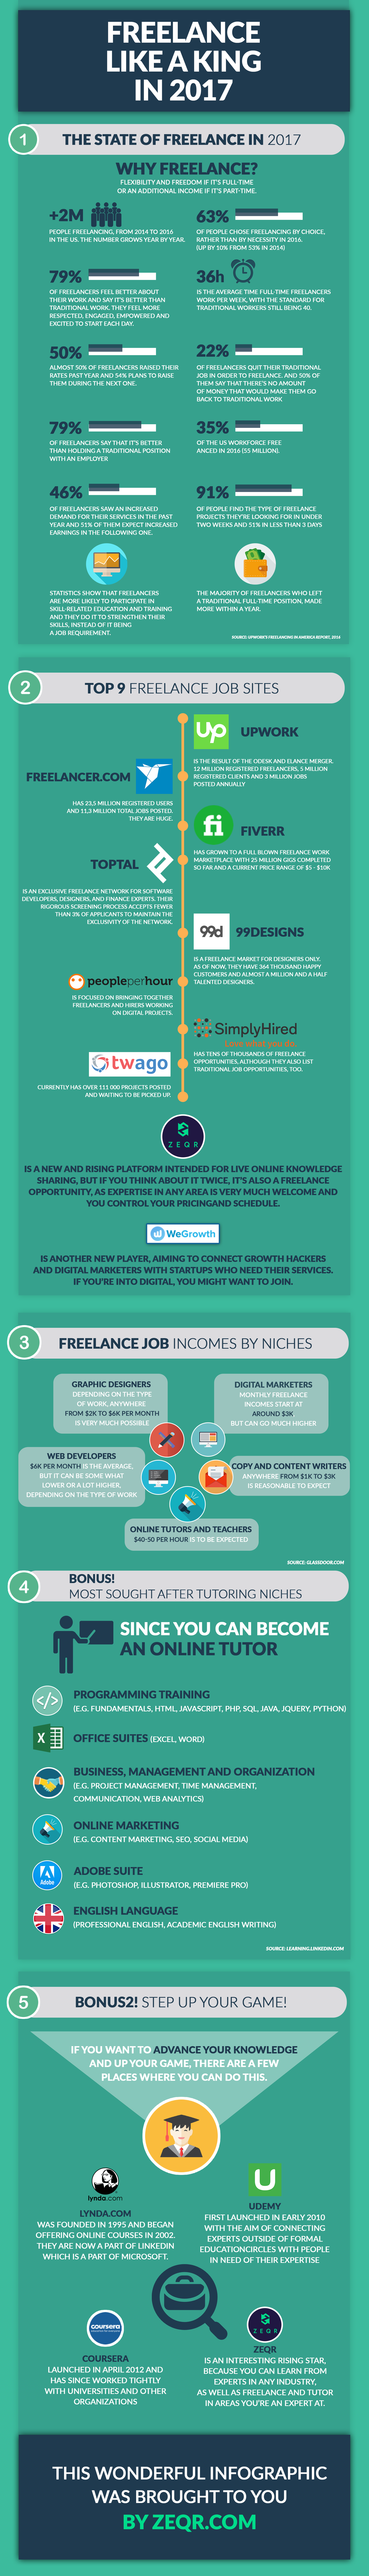 The State of Freelancing (Infographic)